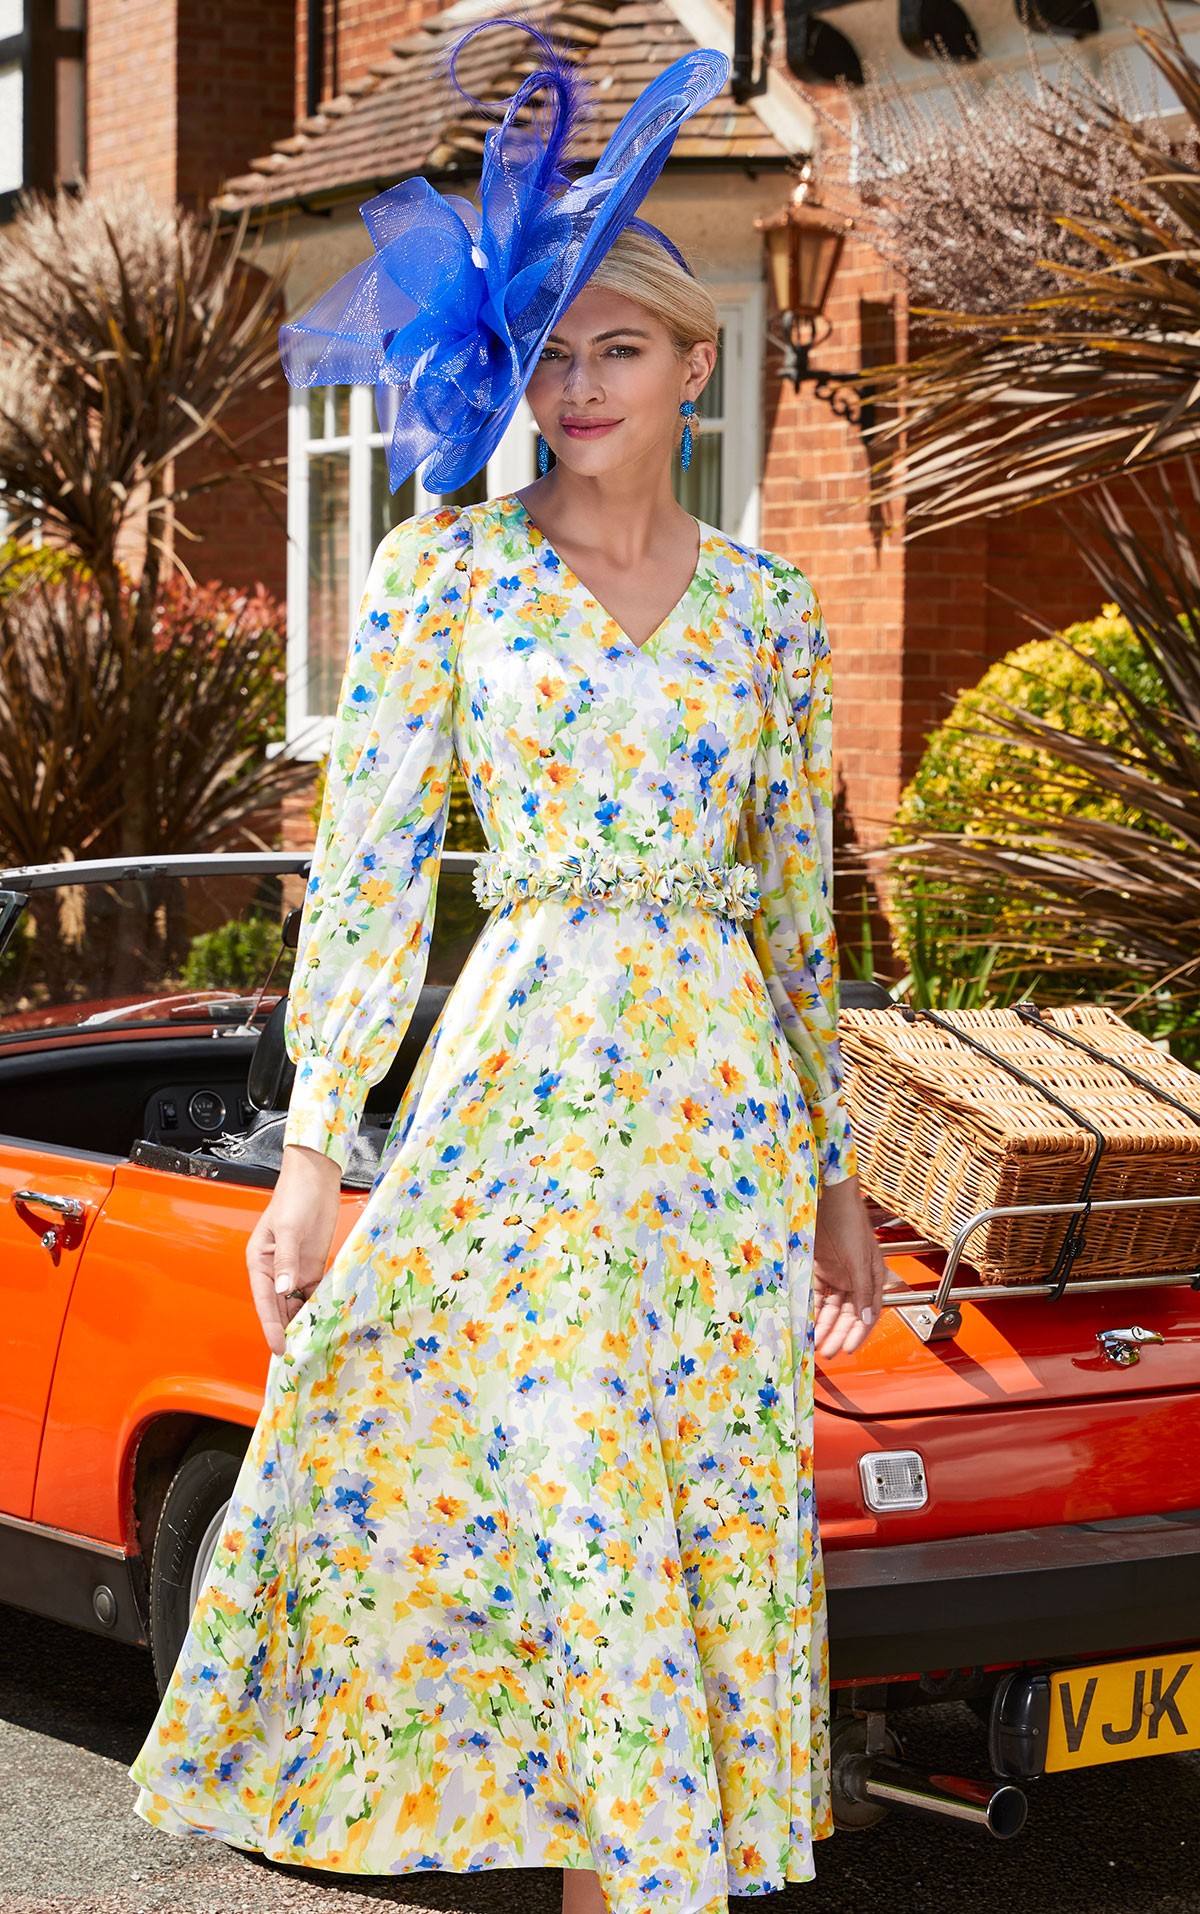 Veni Infantino- 29679 size 6, 18 - Veni Infantino Invitations Collection 29679 - Long Floral print dress with sleeves - Occasion Dresses & Mother of the Bride dresses Now on Sale at Occasions at Blessings Loyal Parade, Mill Rise, Westdene, Brighton. BN1 5GG T: 01273 505766 E: info@blessingsbridal.co.uk